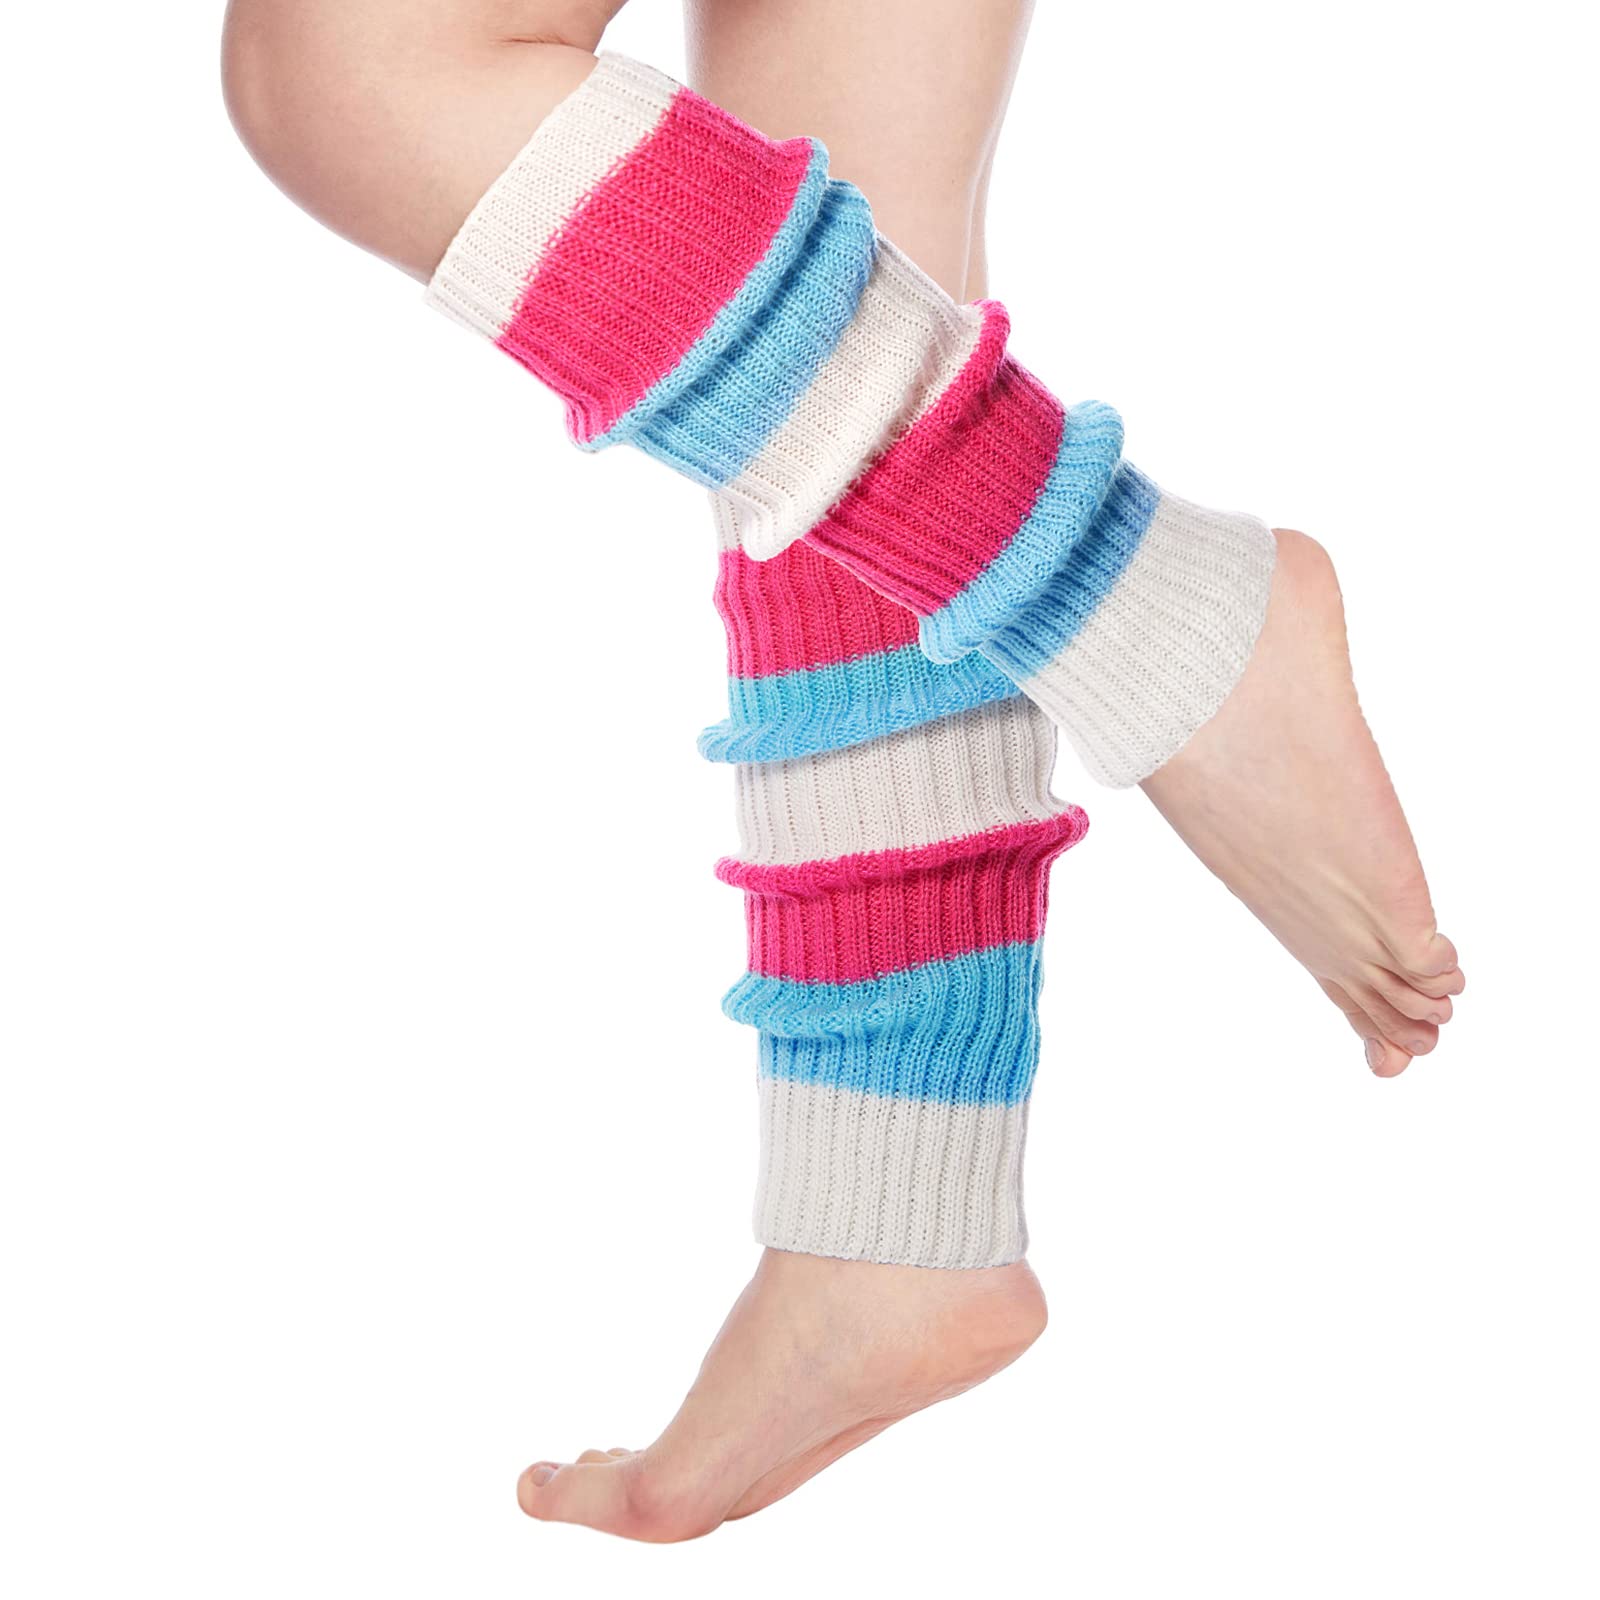 Womens Leg Warmers Neon Knitted for 80s Party Sports Yoga-Rose & Blue & White - Moon Wood